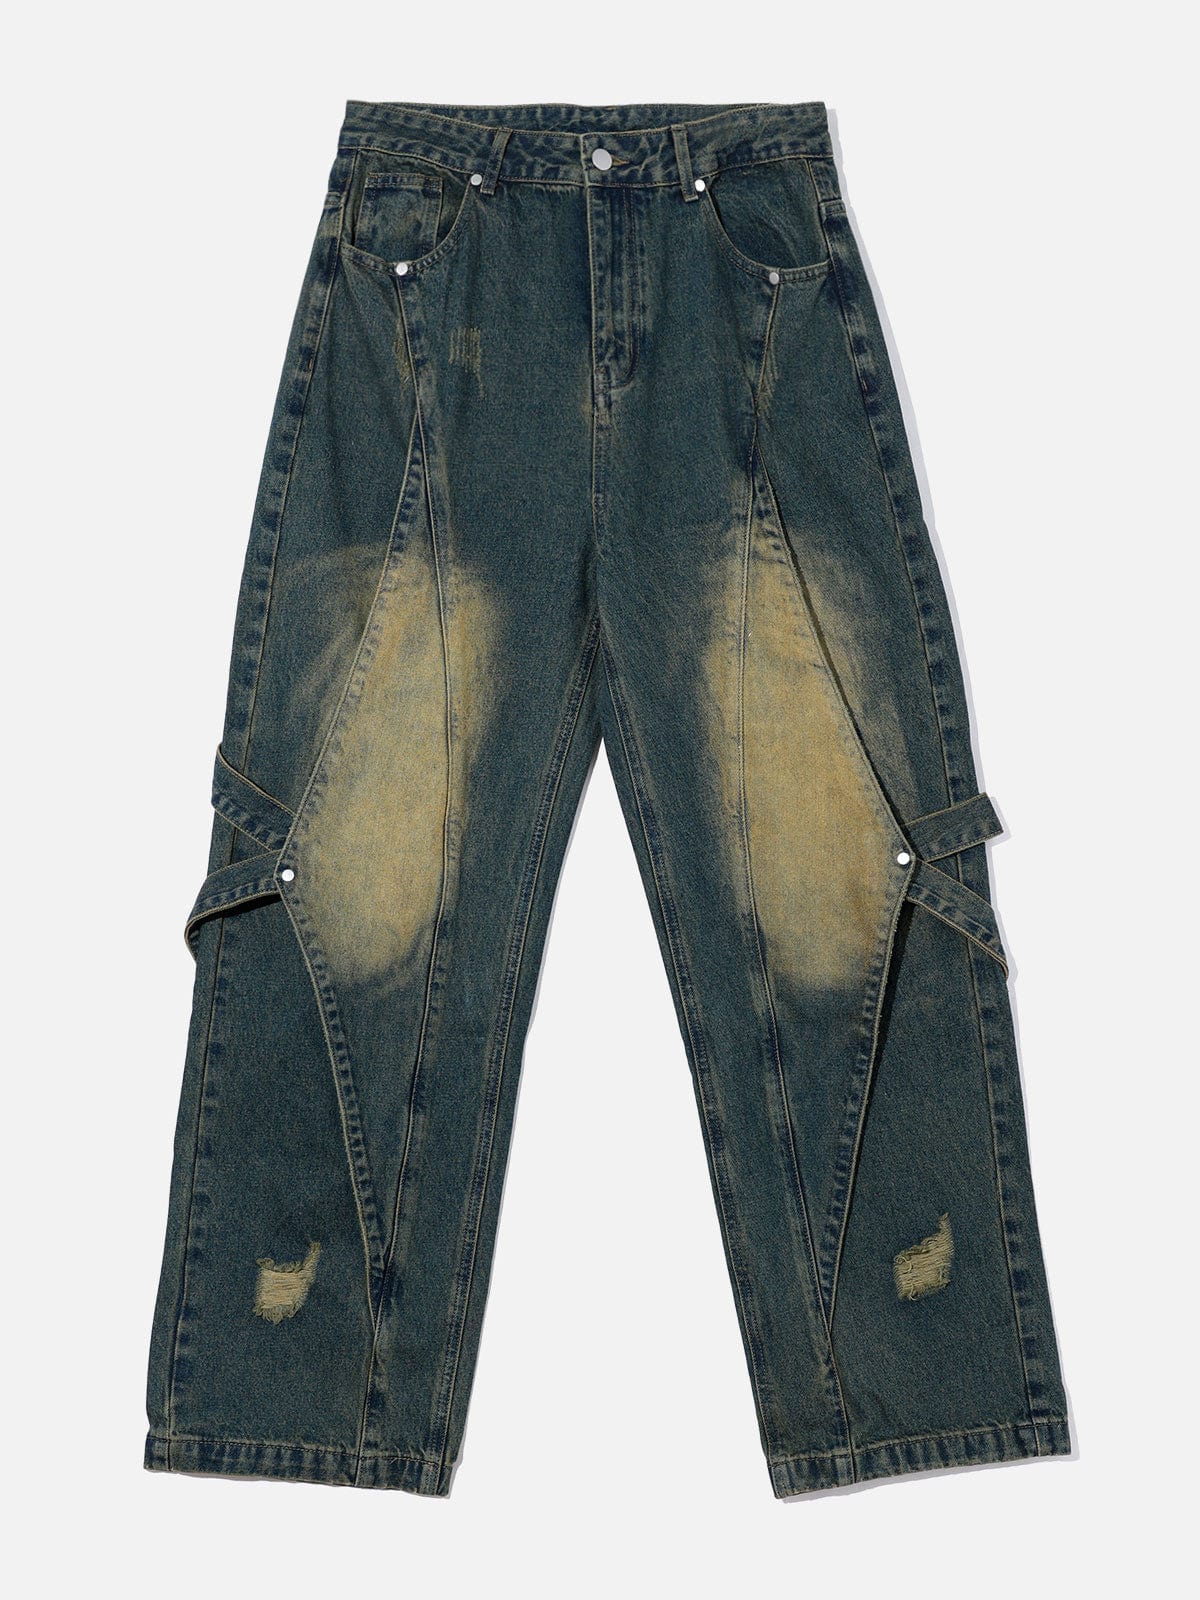 NEV Distressed Washed Stitching Jeans